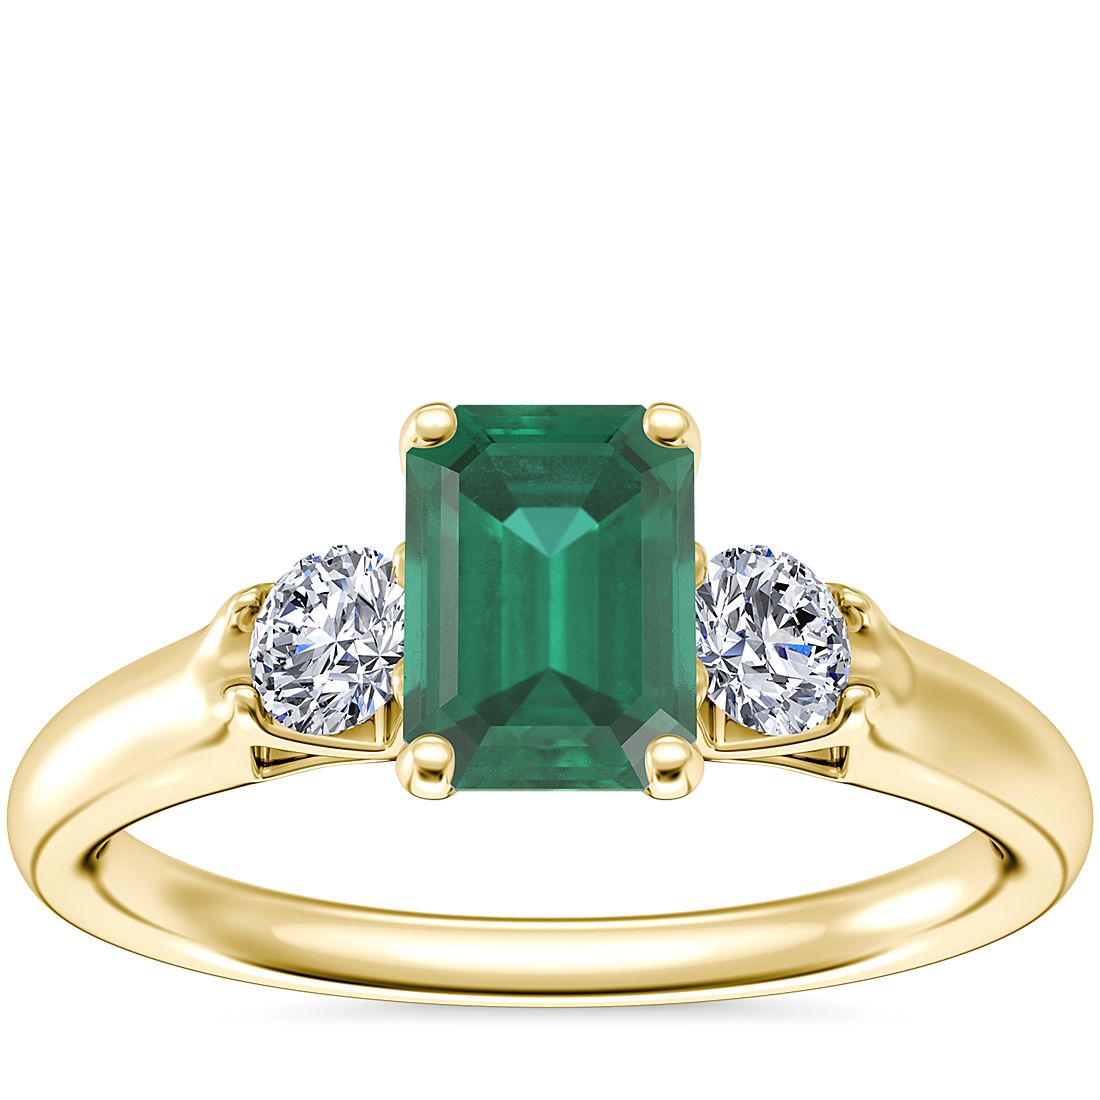 Classic Three Stone Engagement Ring with Emerald-Cut Emerald in 14k Yellow Gold (7x5mm)